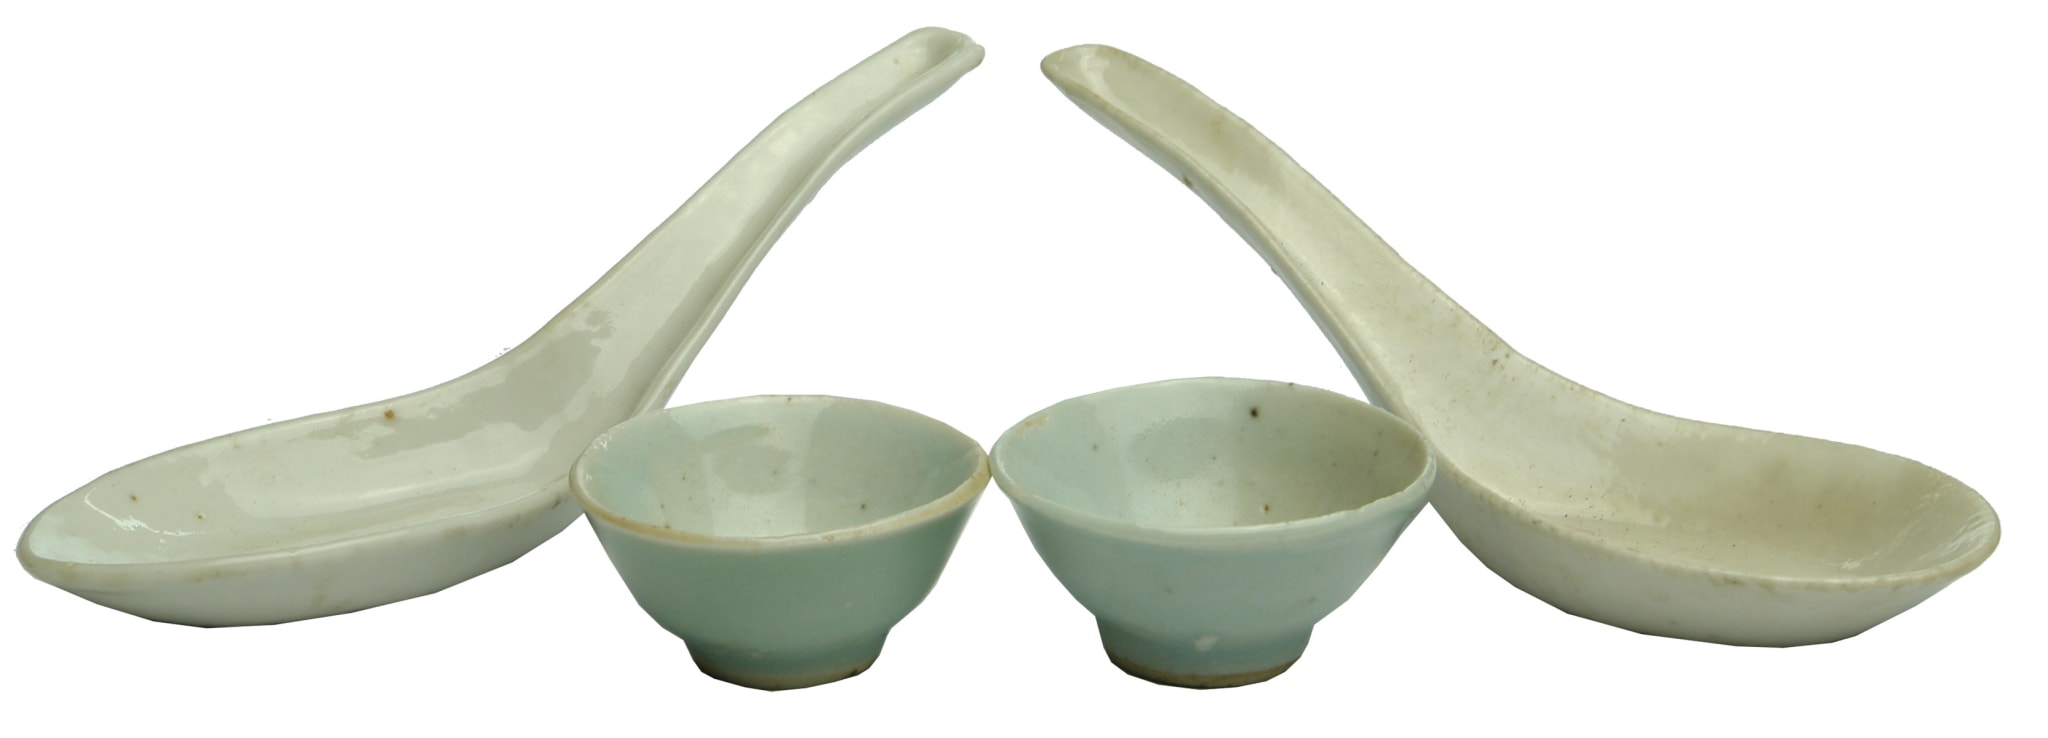 Chinese Porcelain Spoons Bowls Qing Dynasty